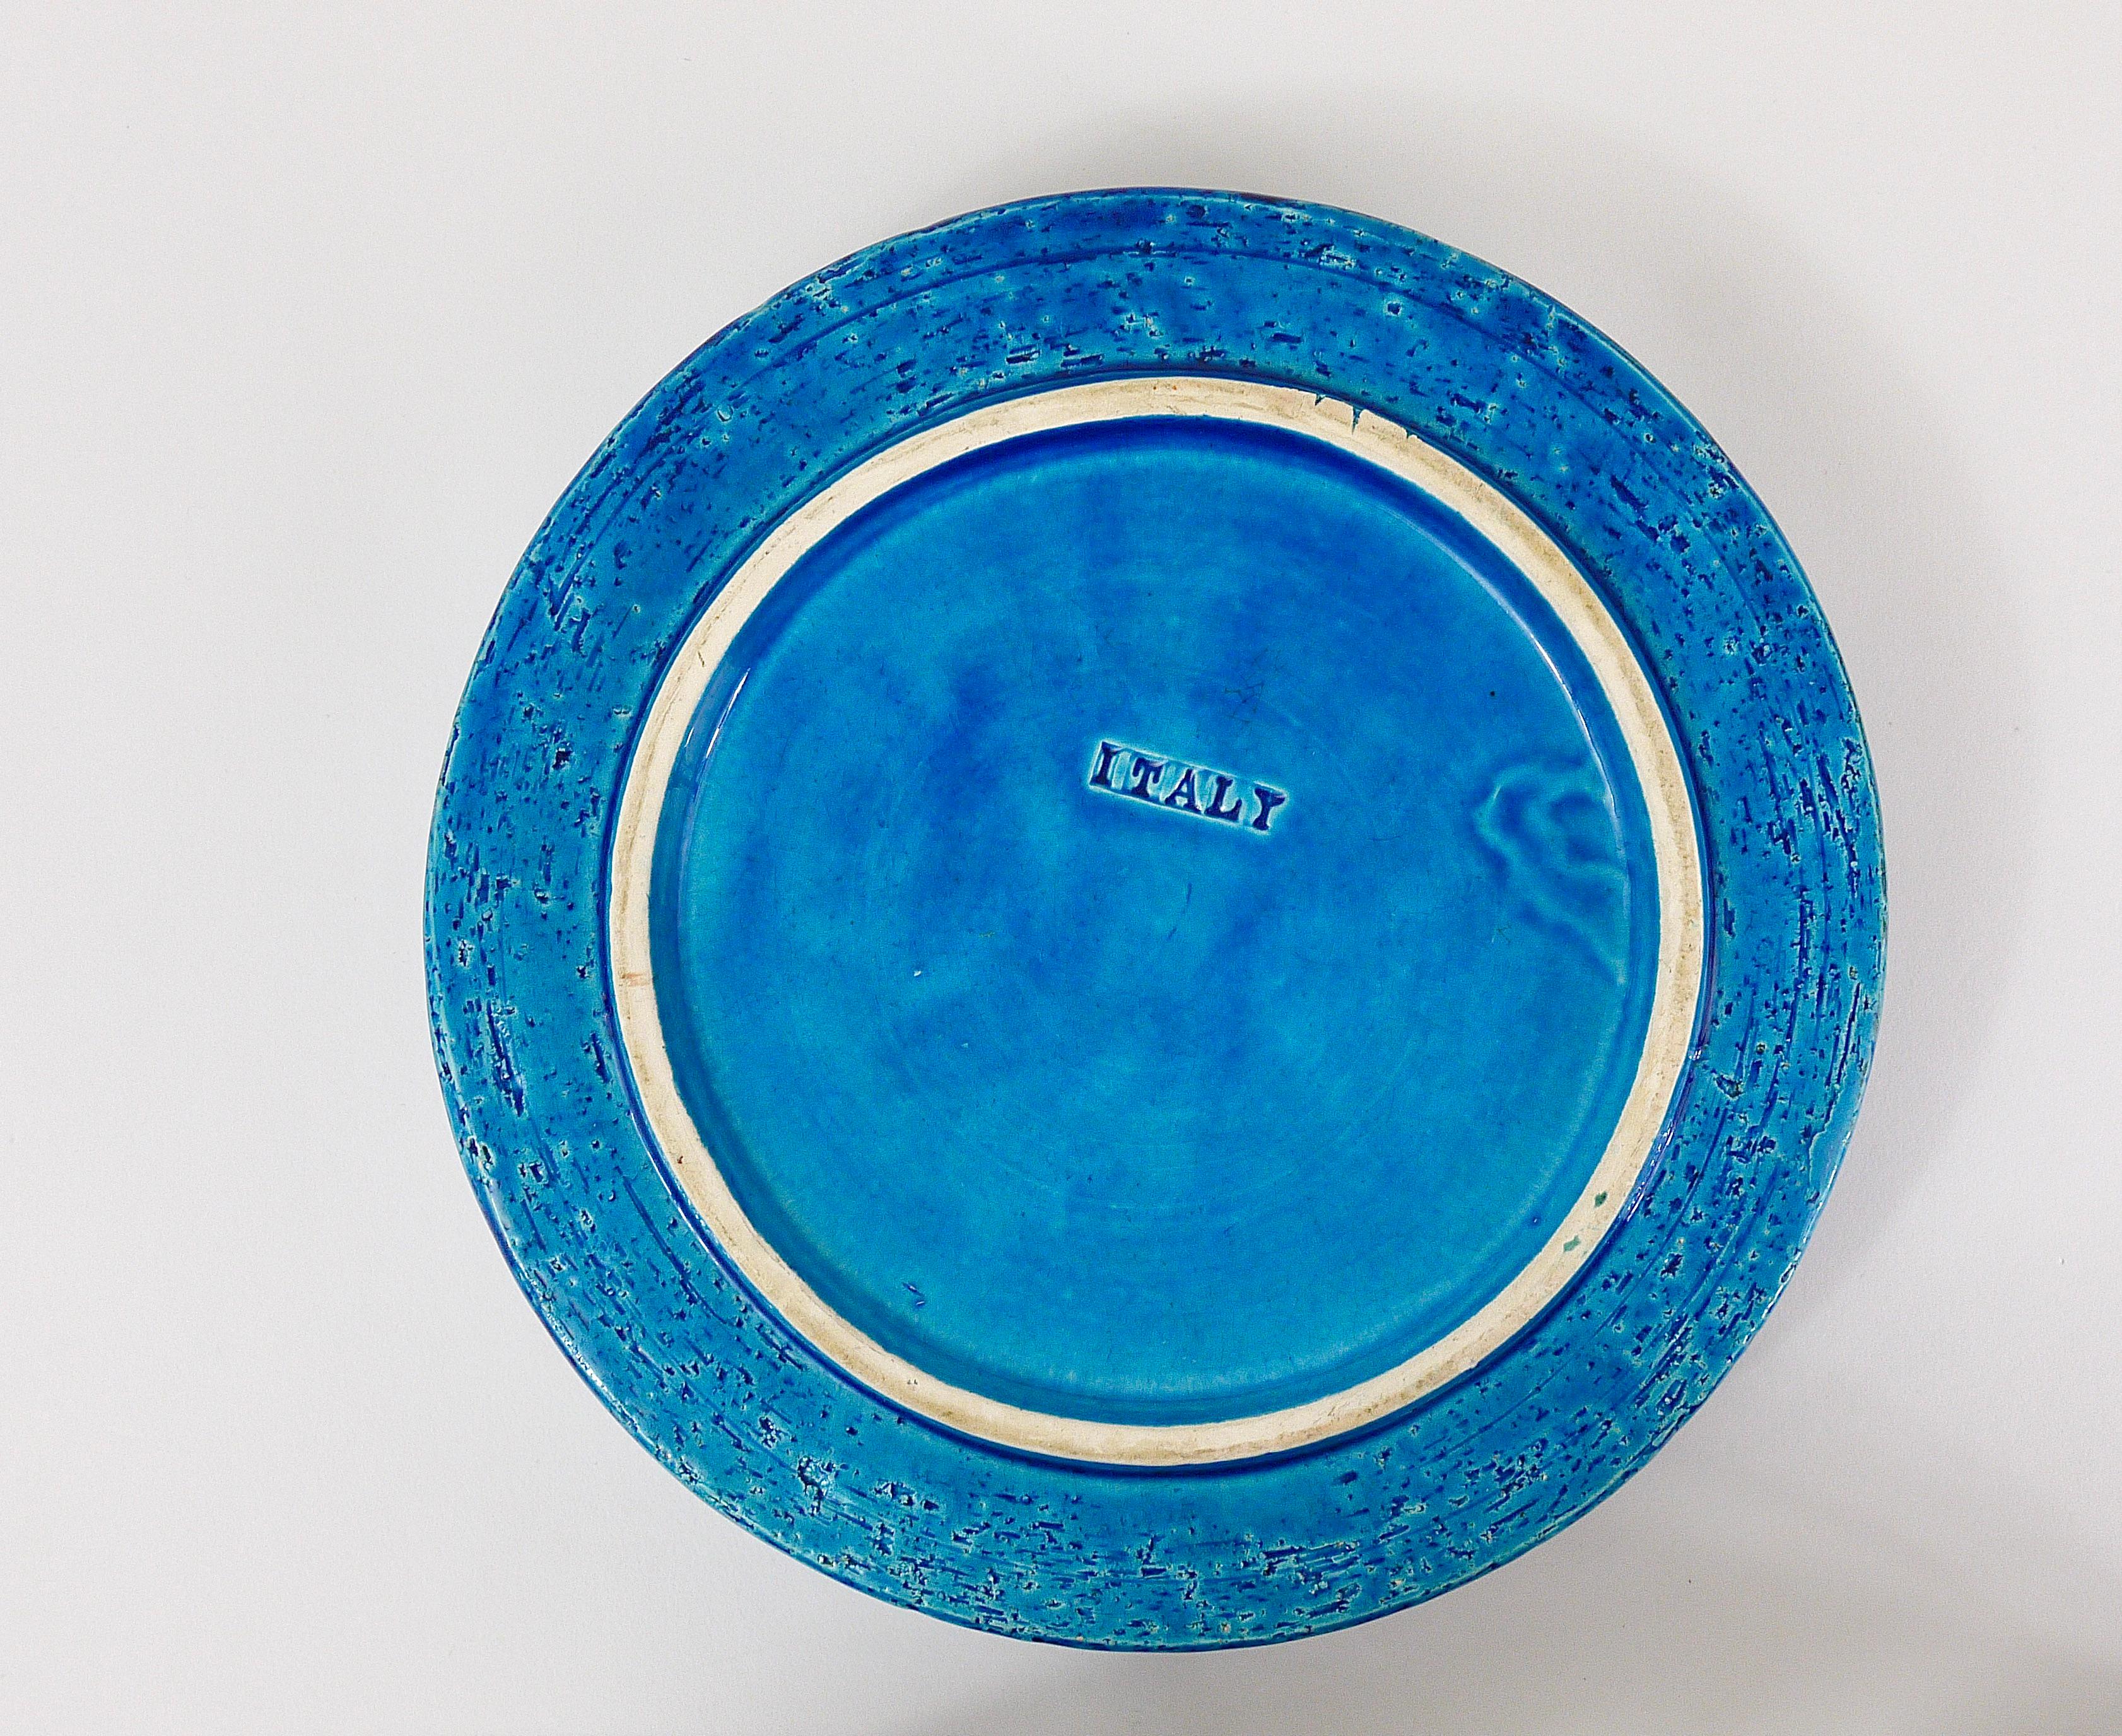 Aldo Londi Bitossi Very Large Round Rimini Blue Glazed Midcentury Ashtray, 1950s In Good Condition For Sale In Vienna, AT